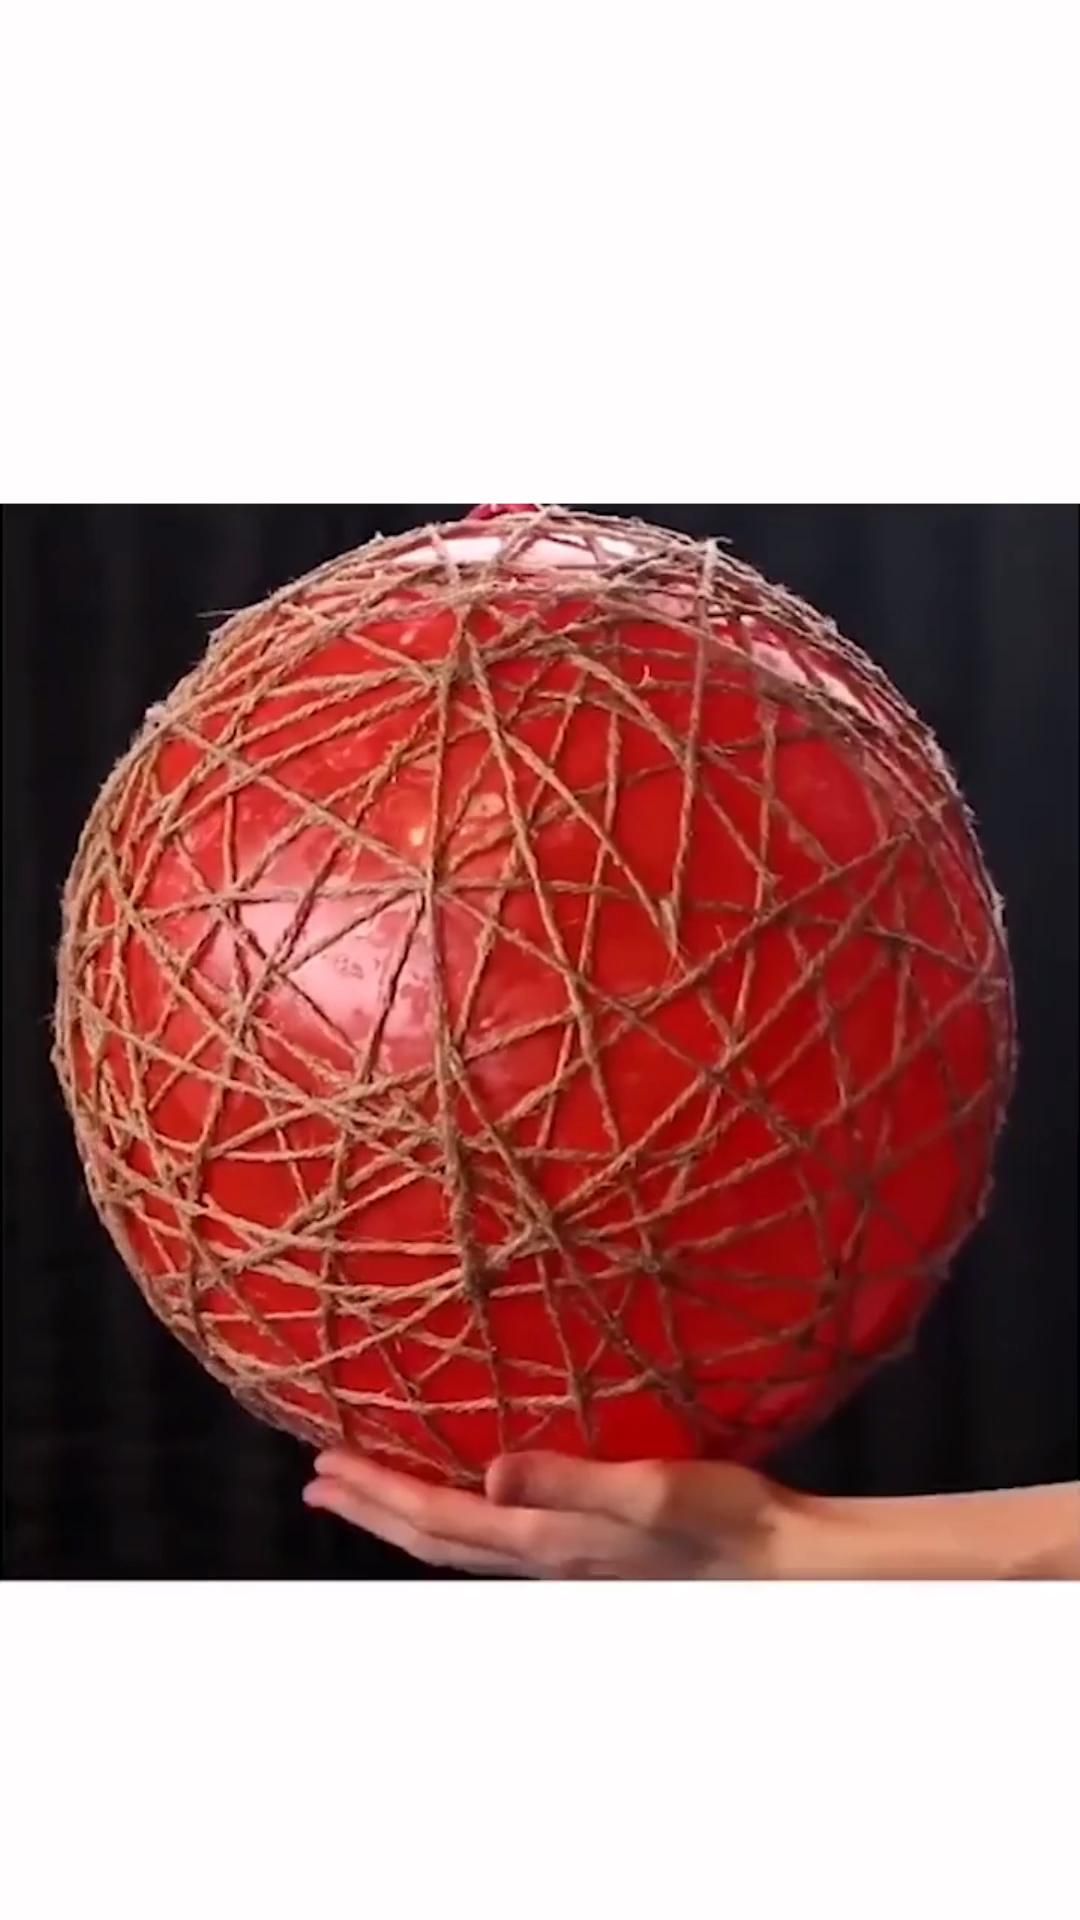 DIY-How to Make a Large Rattan Ball in 3 Steps - Decorative Ball for Home Decor - DIY-How to Make a Large Rattan Ball in 3 Steps - Decorative Ball for Home Decor -   16 diy Videos room ideas